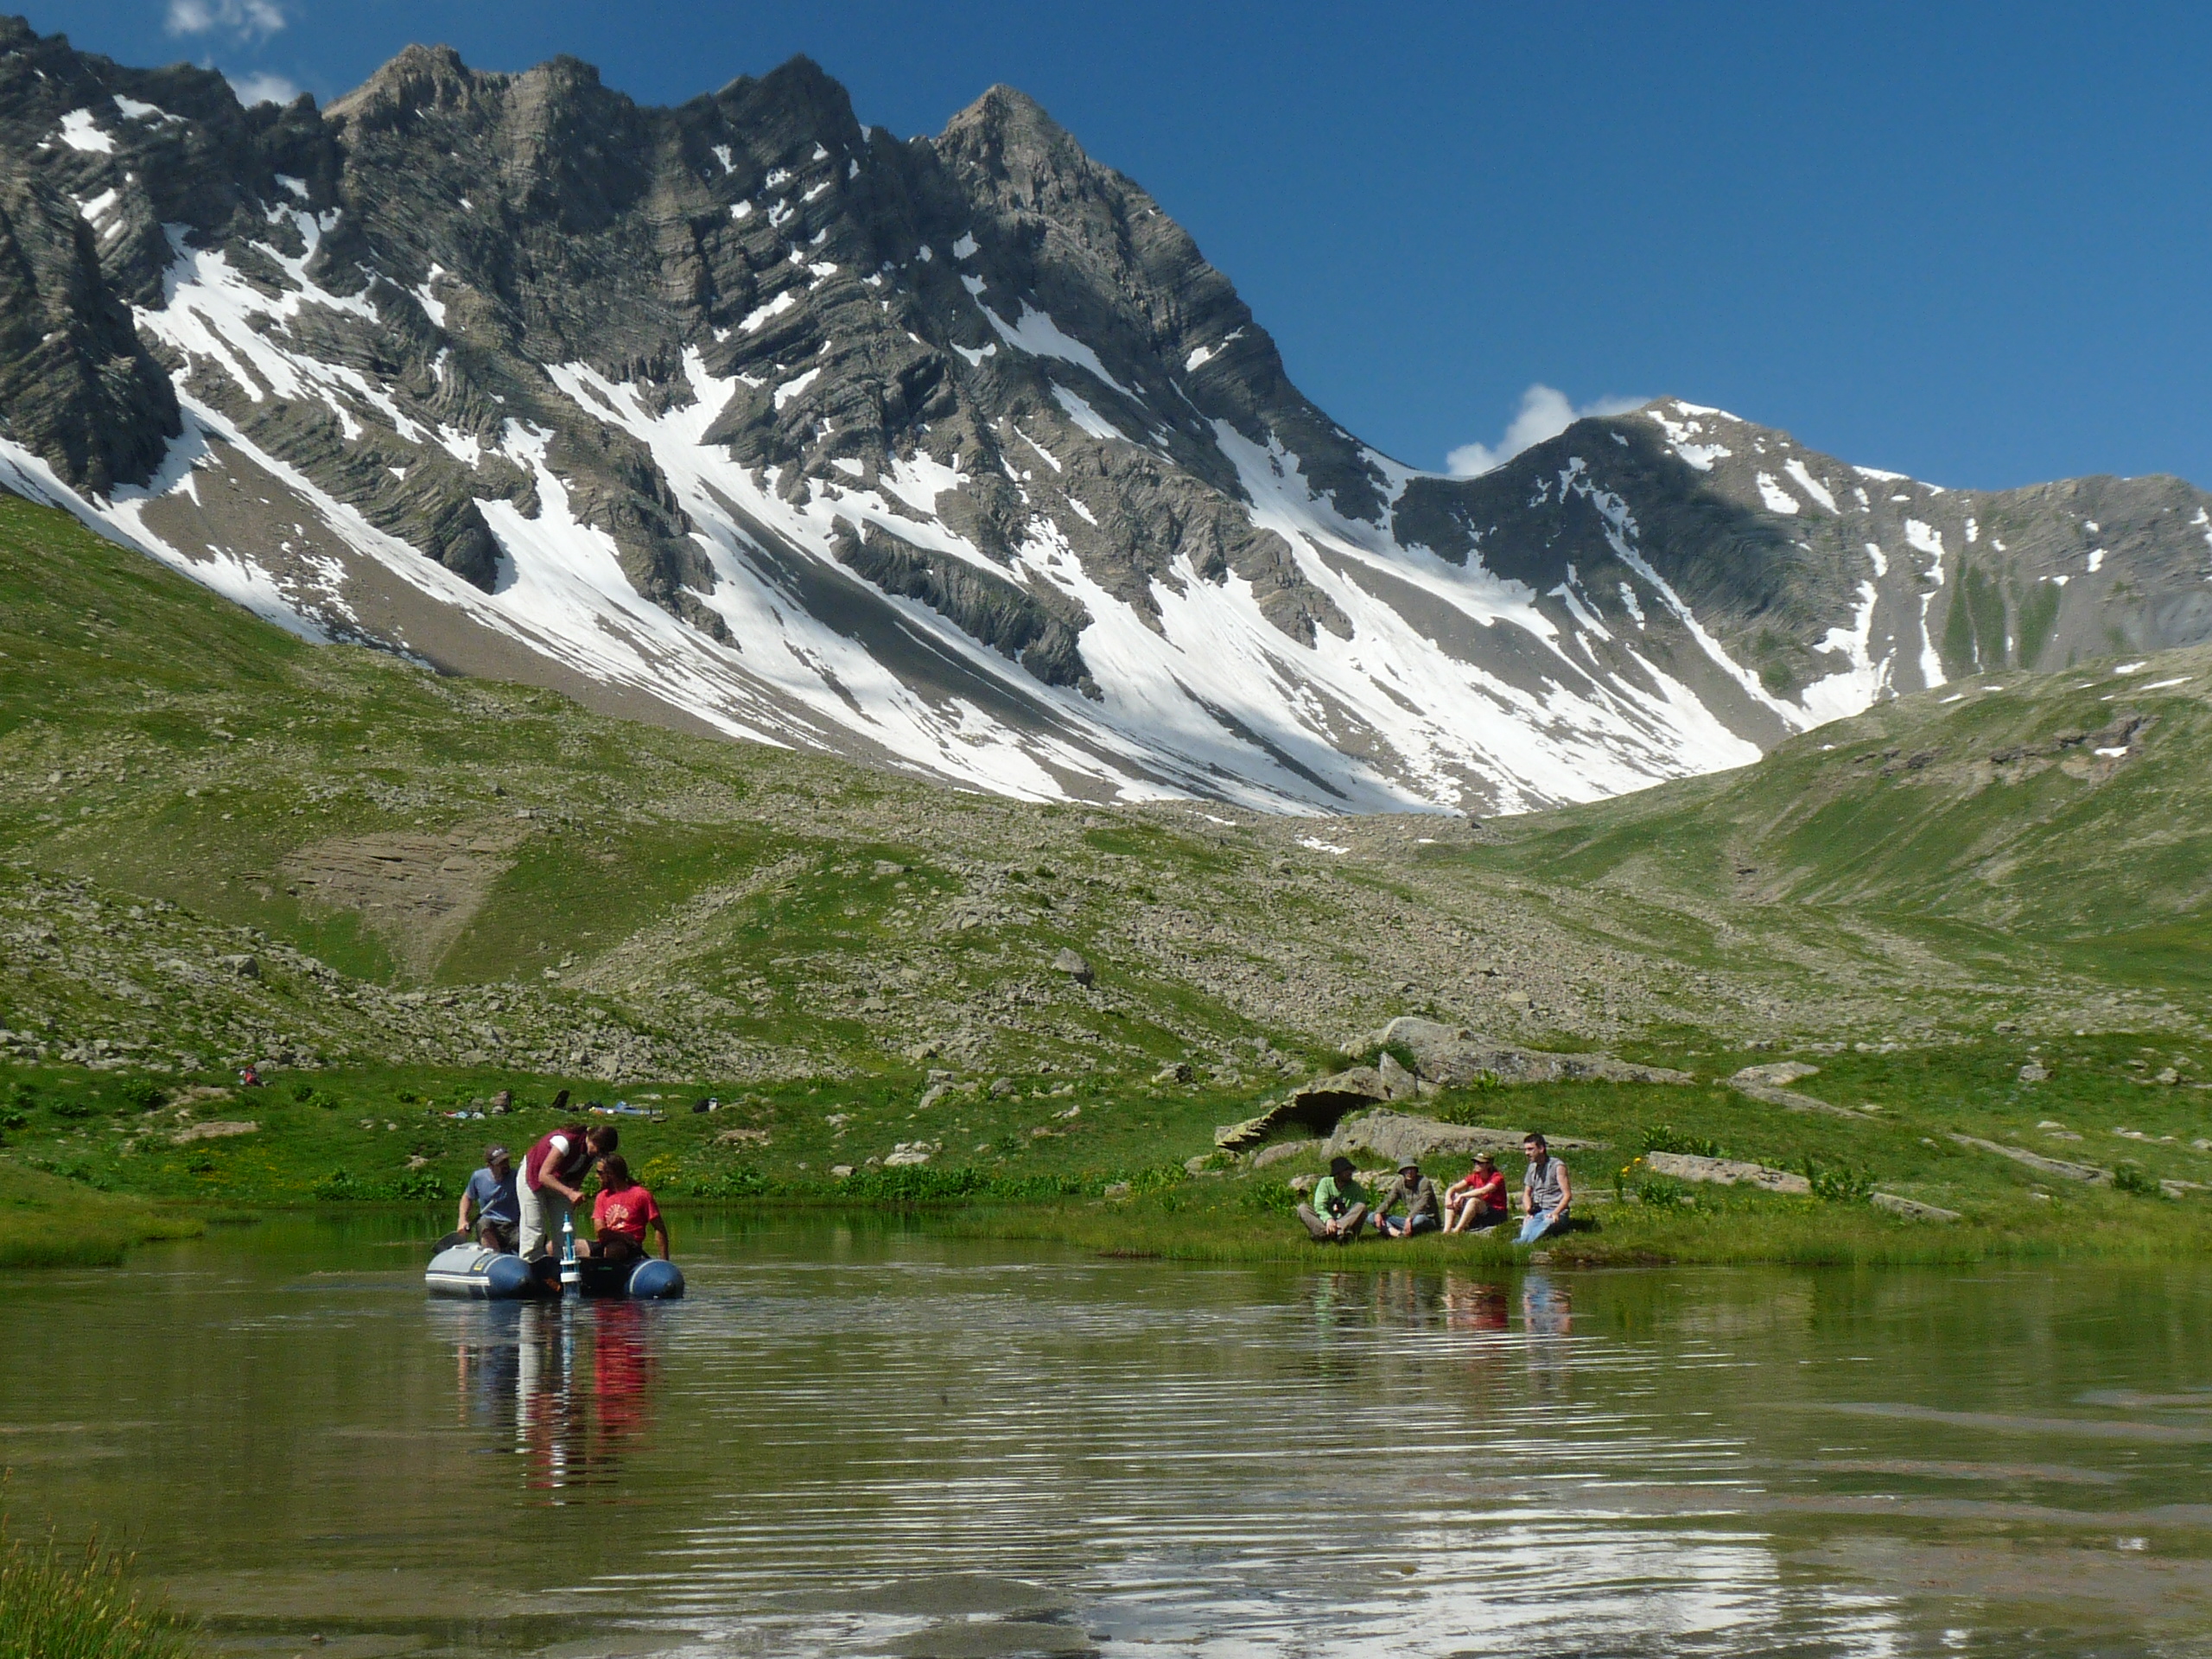 Image: Sampling work at one of the high altitude alpine lakes